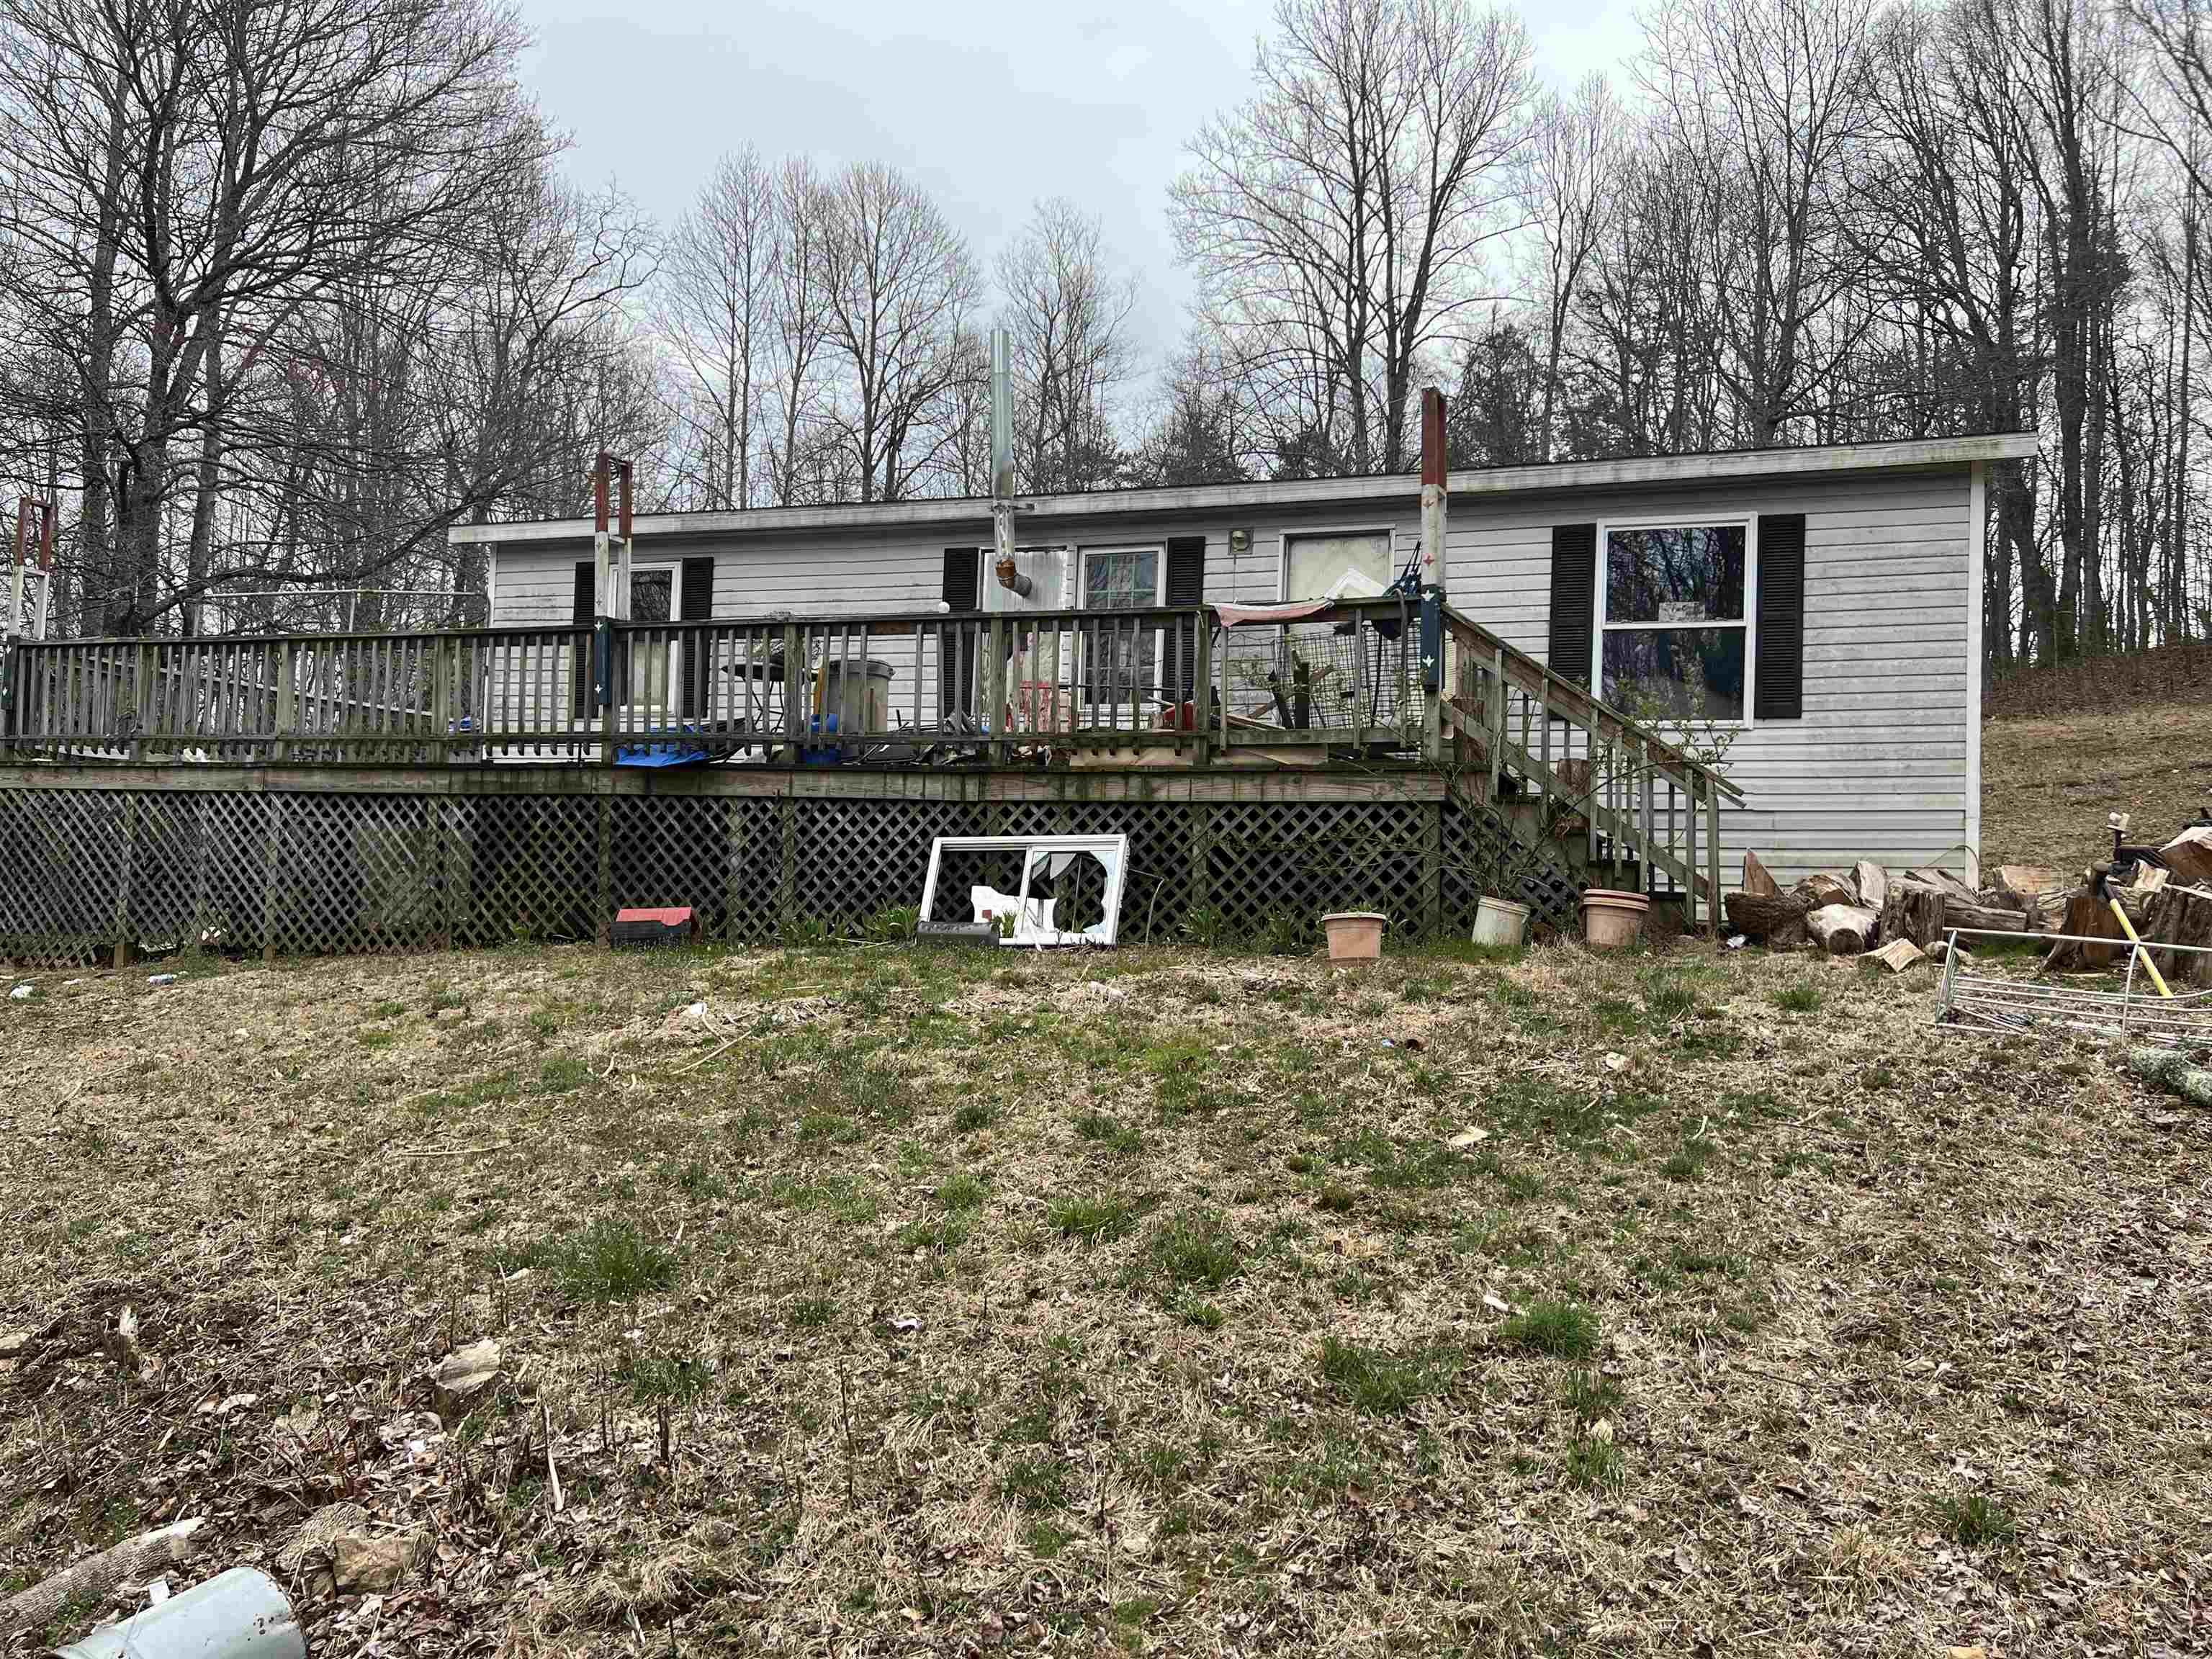 If you are looking for a home that sits back in the woods then look no farther. This 3 Bedroom 2 Bath Fixer upper Double Wide sits on 4.3 Acres. The property needs a Good Cleaning and alot of trash removal but has loads of potential. You will probably need a 4 wheel drive or a vehicle that sits up off the ground to get to the property. My Honda Civic didn't like the Driveway. The property is being Sold AS/IS no repairs or cleaning up will be done.